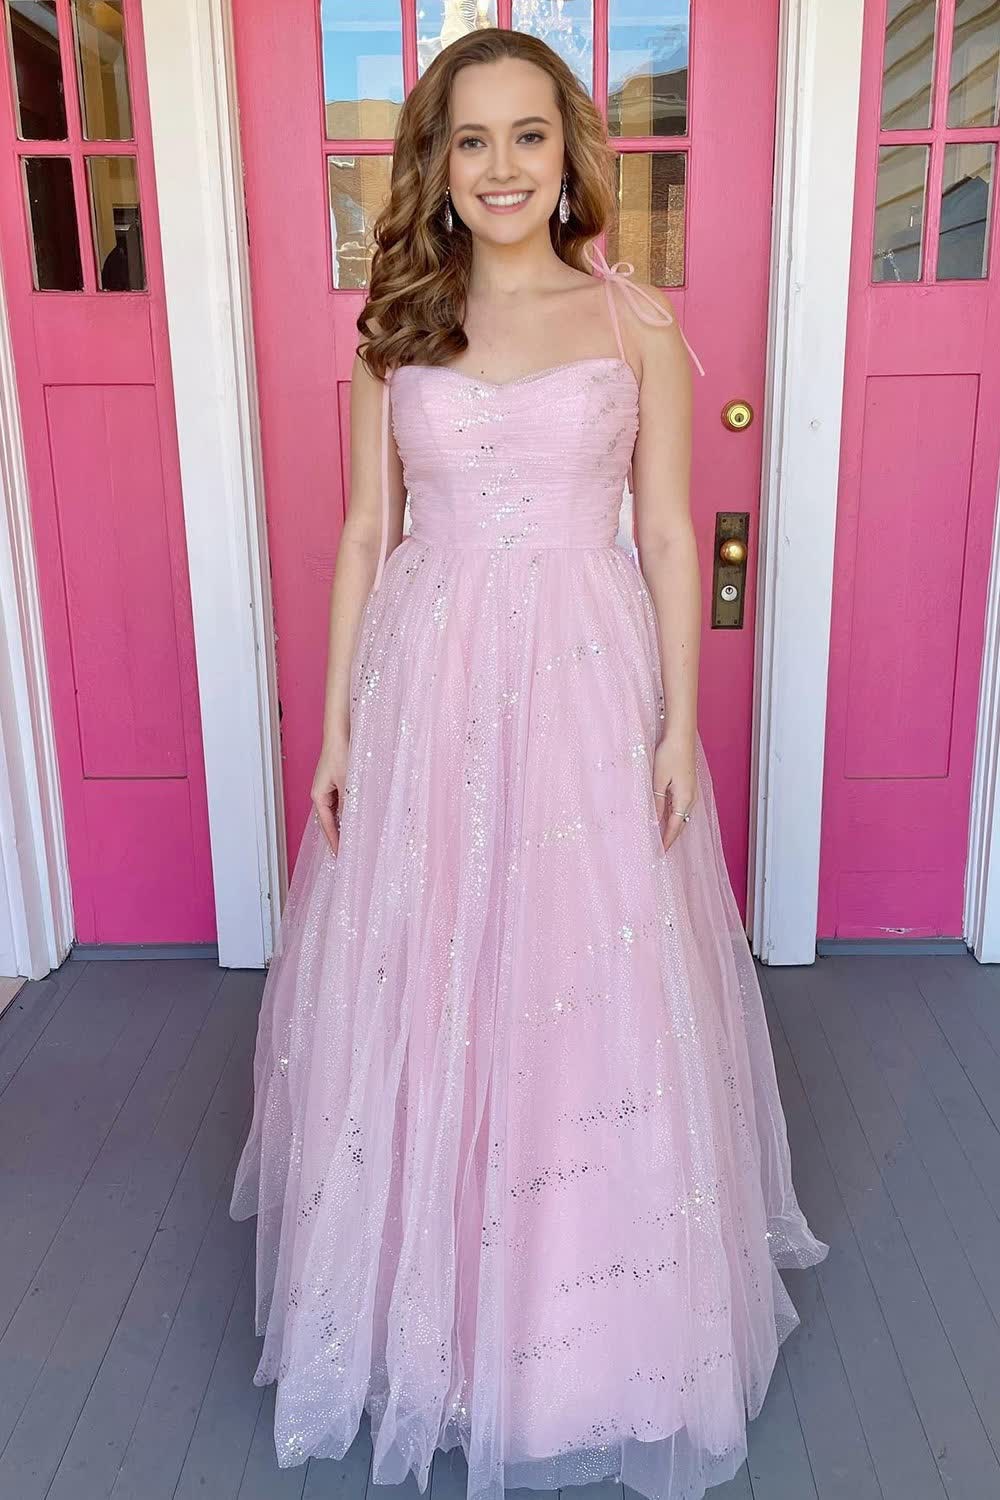 Pink Tulle A-Line Corset Prom Dress outfits, Pink Tulle A-Line Prom Dress